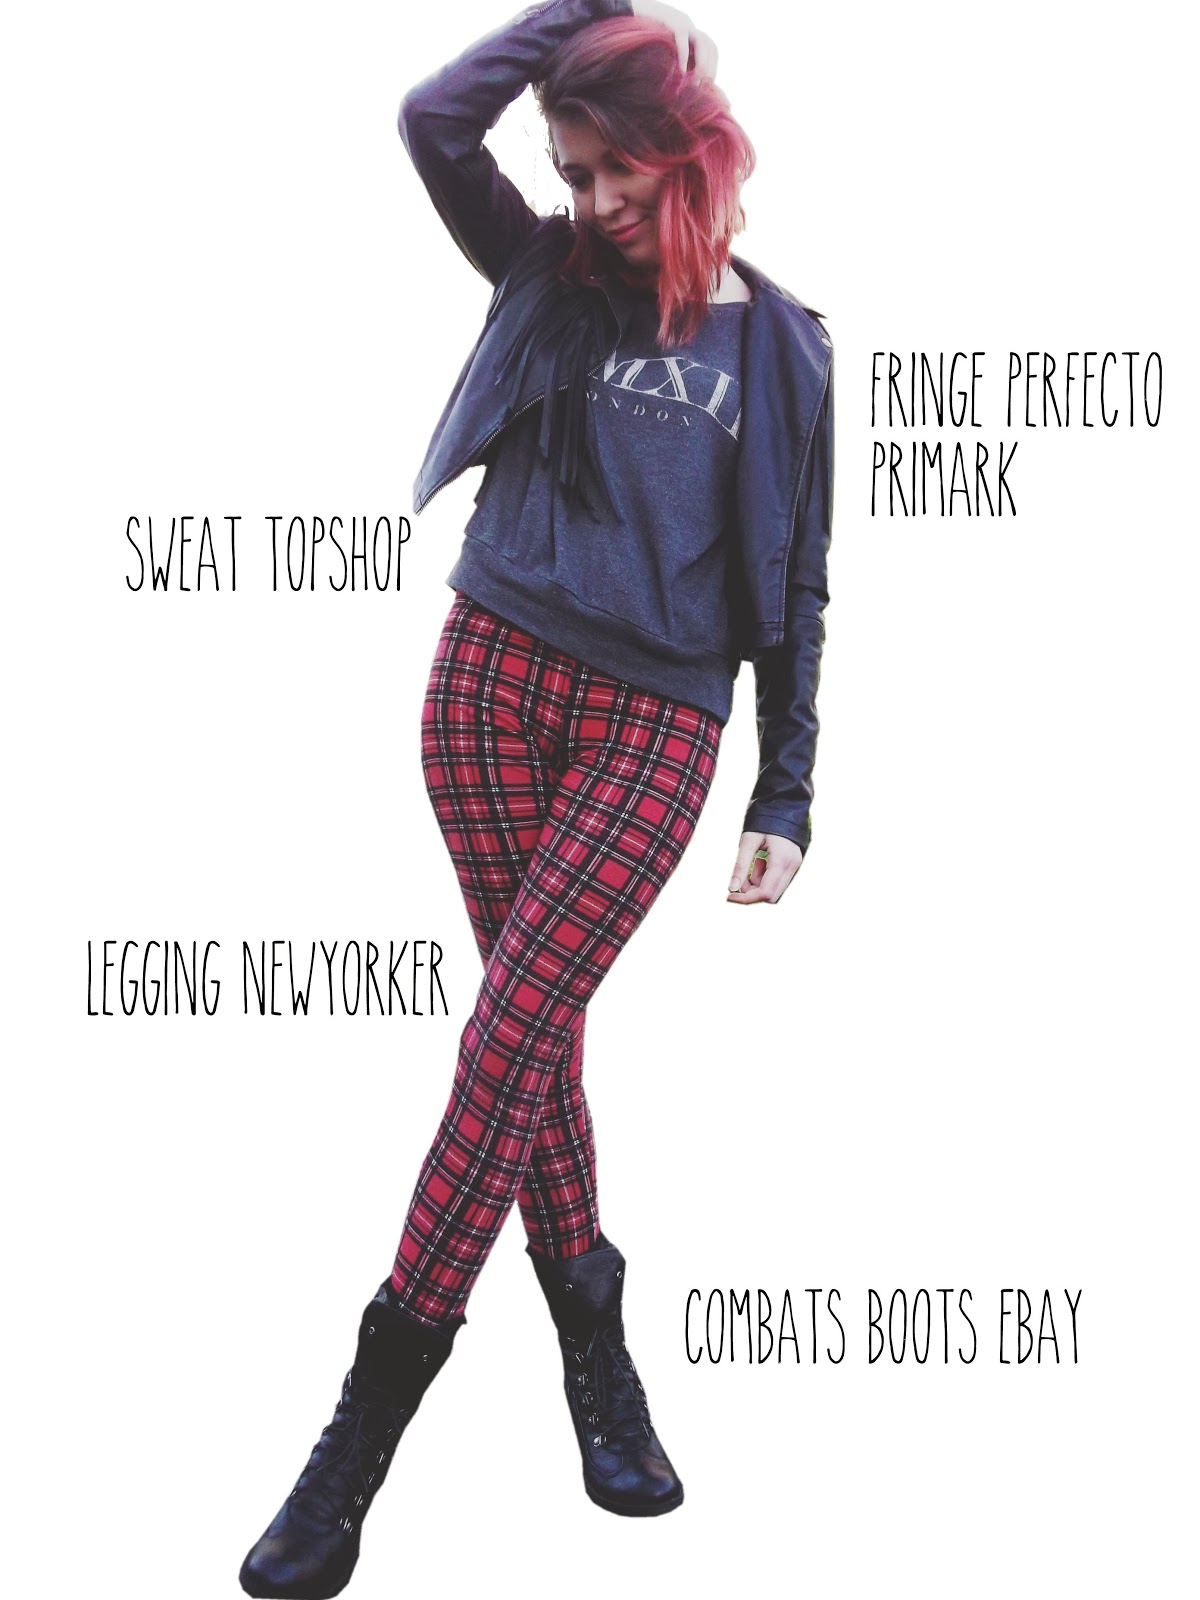 red hair, cold, fringe perfecto, lookbook, Mode, ootd, Outfits, primark, punk, tartan, topshop, winter, 